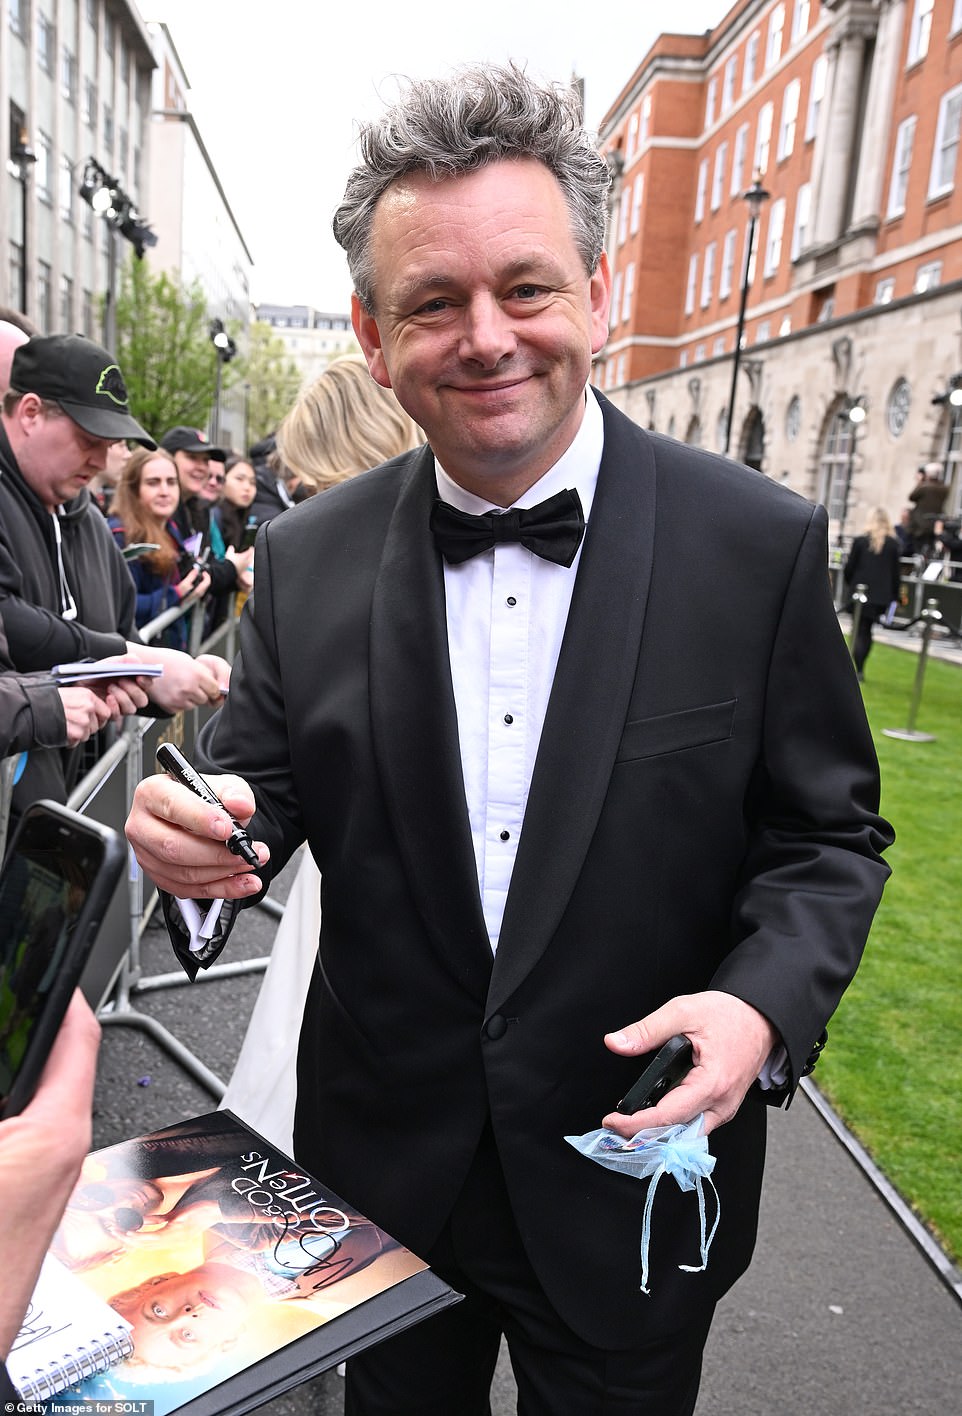 Michael Sheen graciously handed out autographs to the waiting fans as he made his way into the ceremony